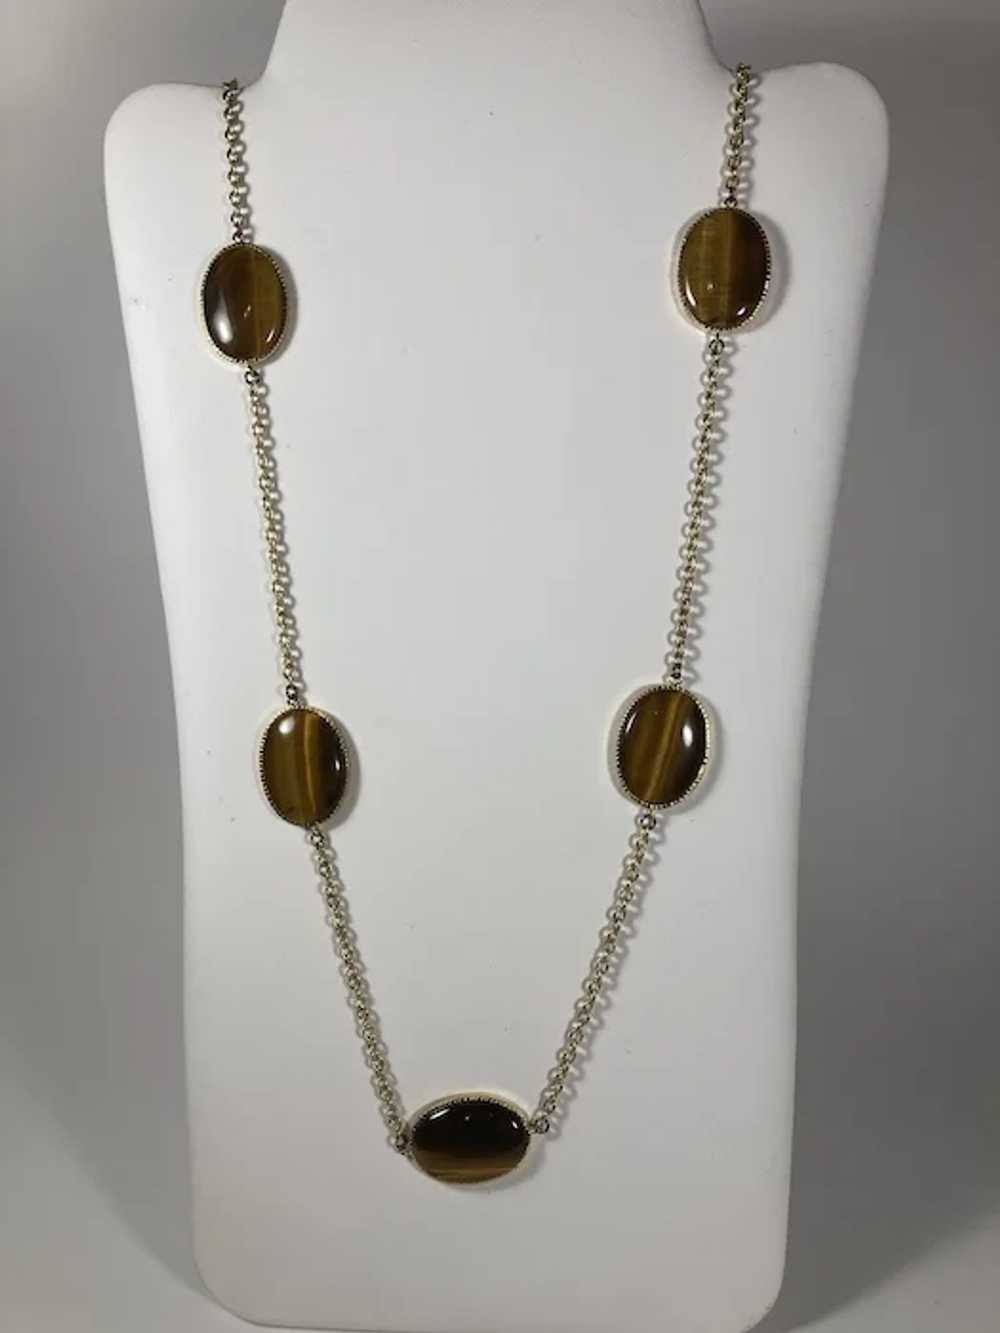 Tiger's Eye Ovals on Gold Tone Chain - image 2